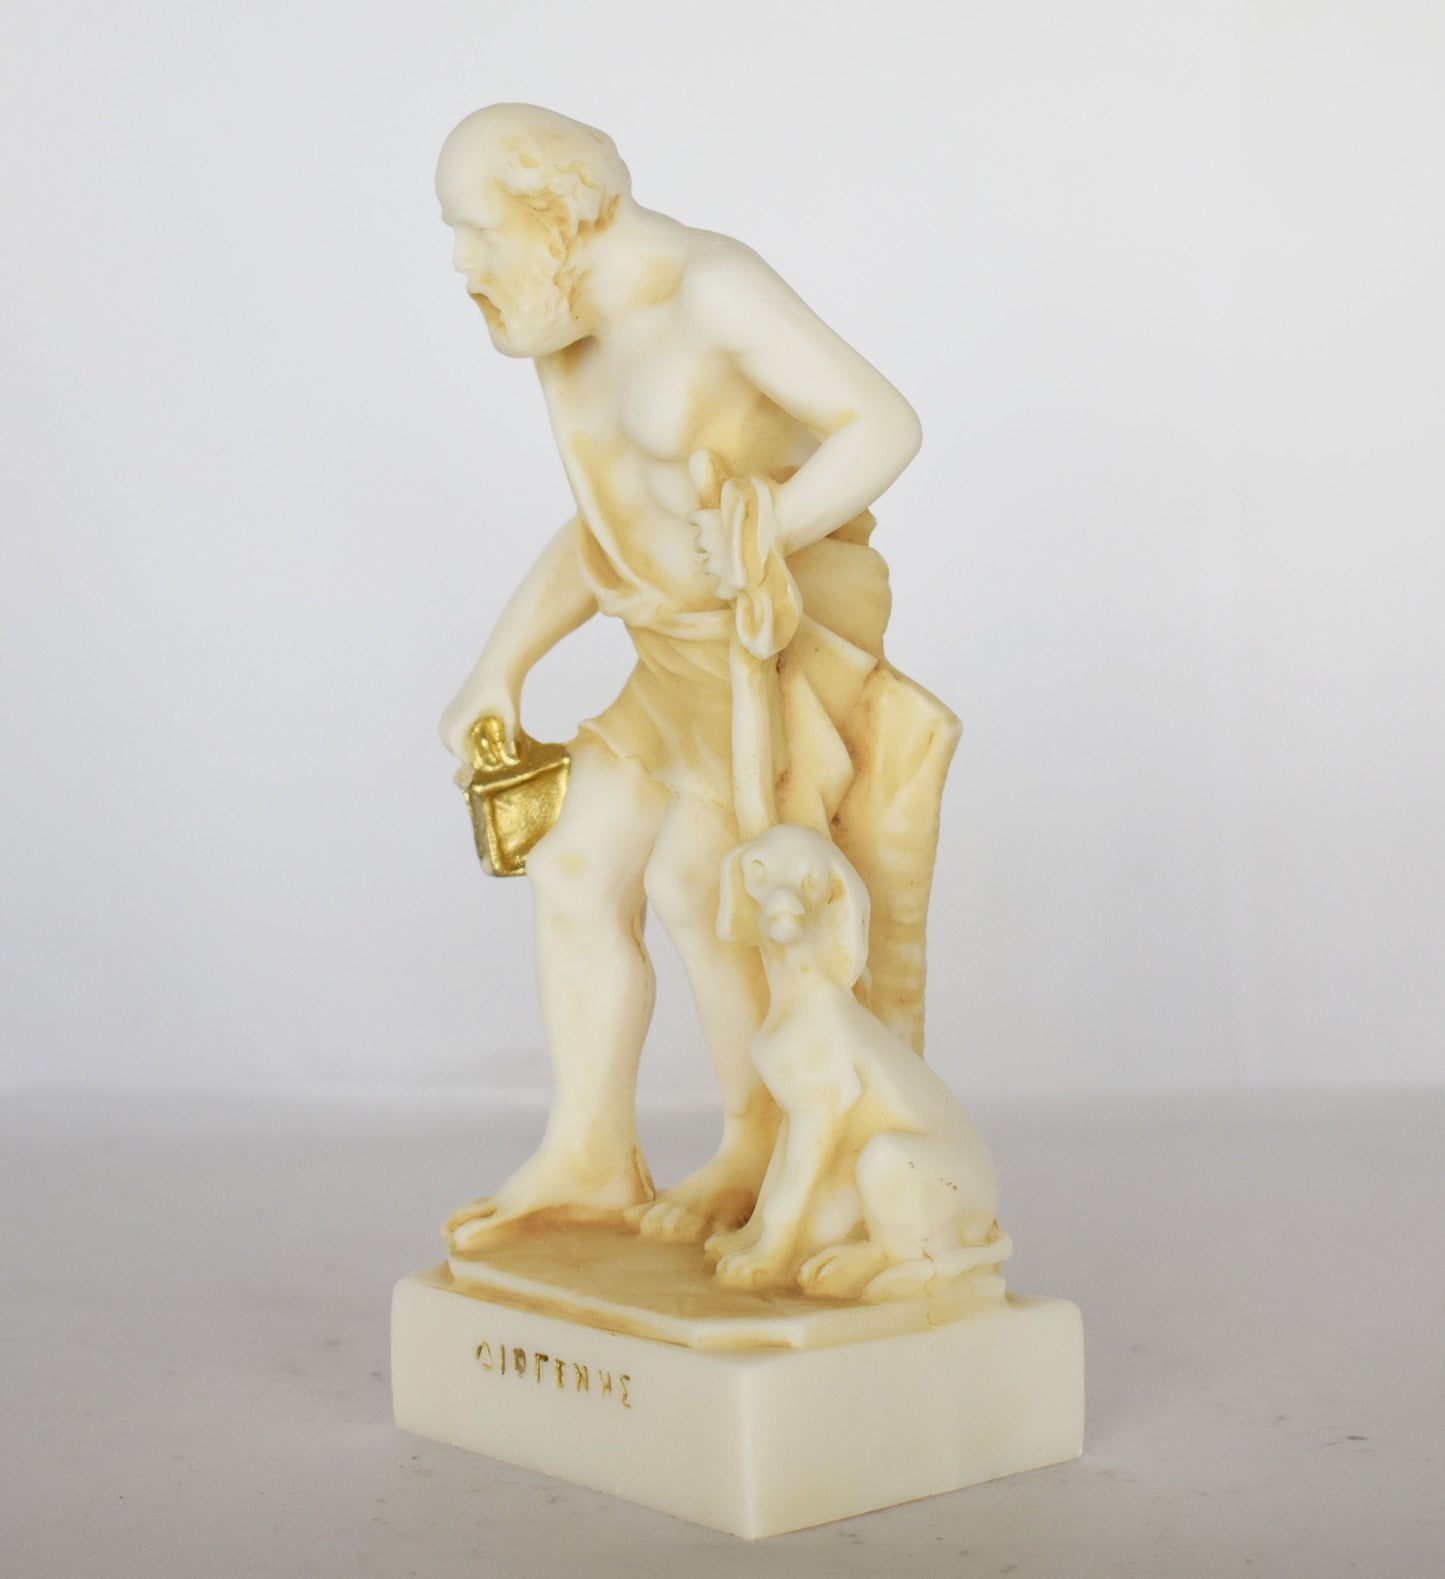 Diogenes the Cynic - Ancient Greek Philosopher - 412 -323 BC - Alabaster Statue